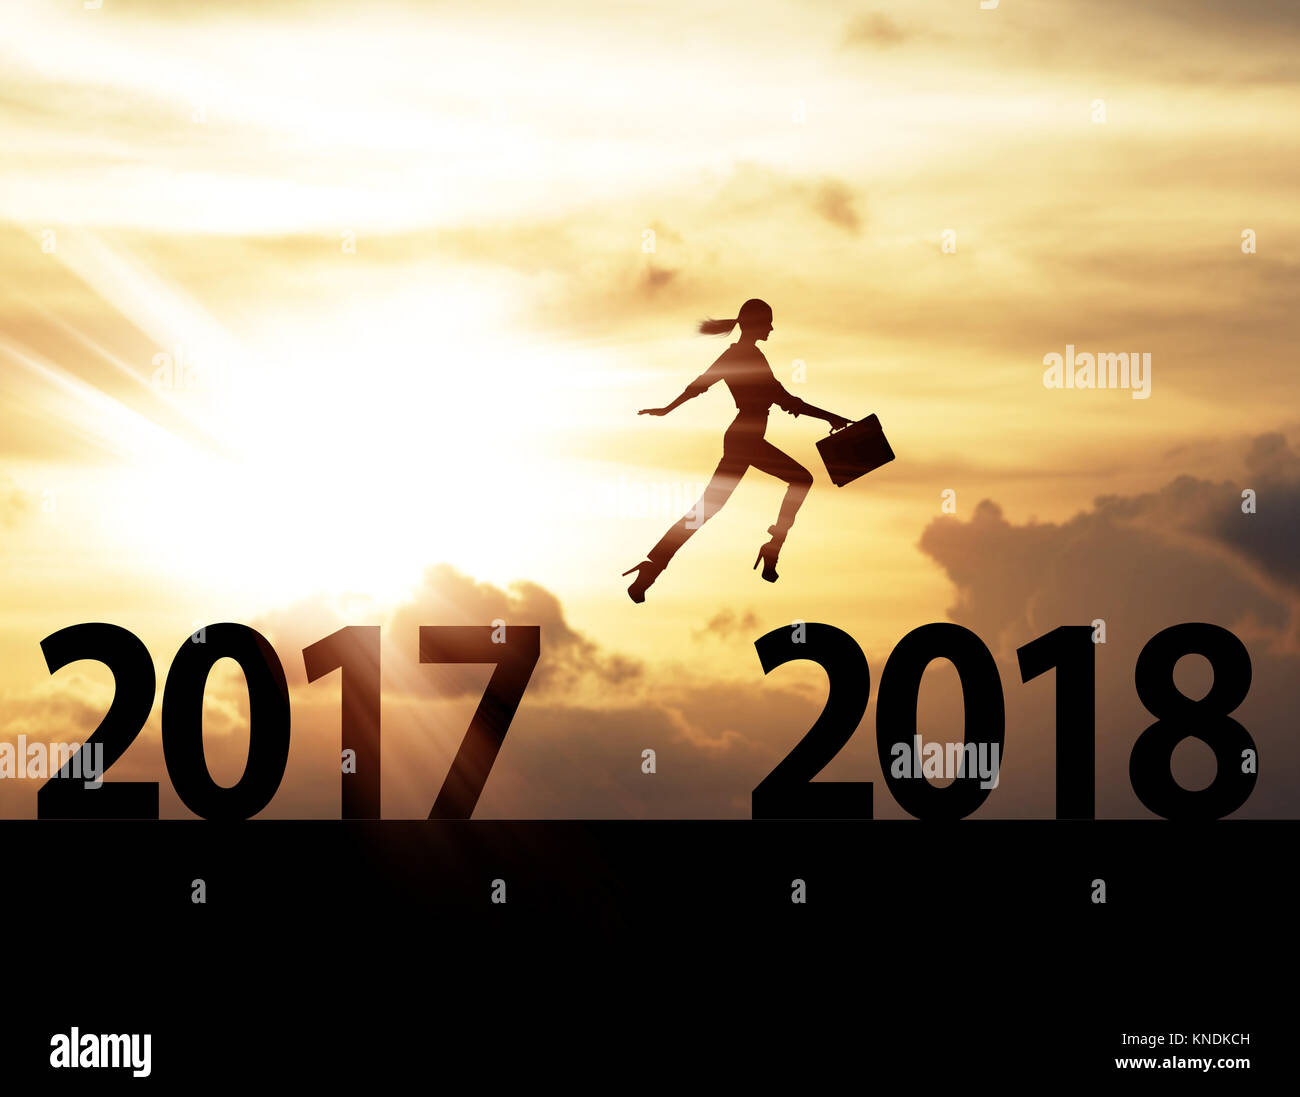 Men jump over silhouette Happy New Year 2018 Stock Photo